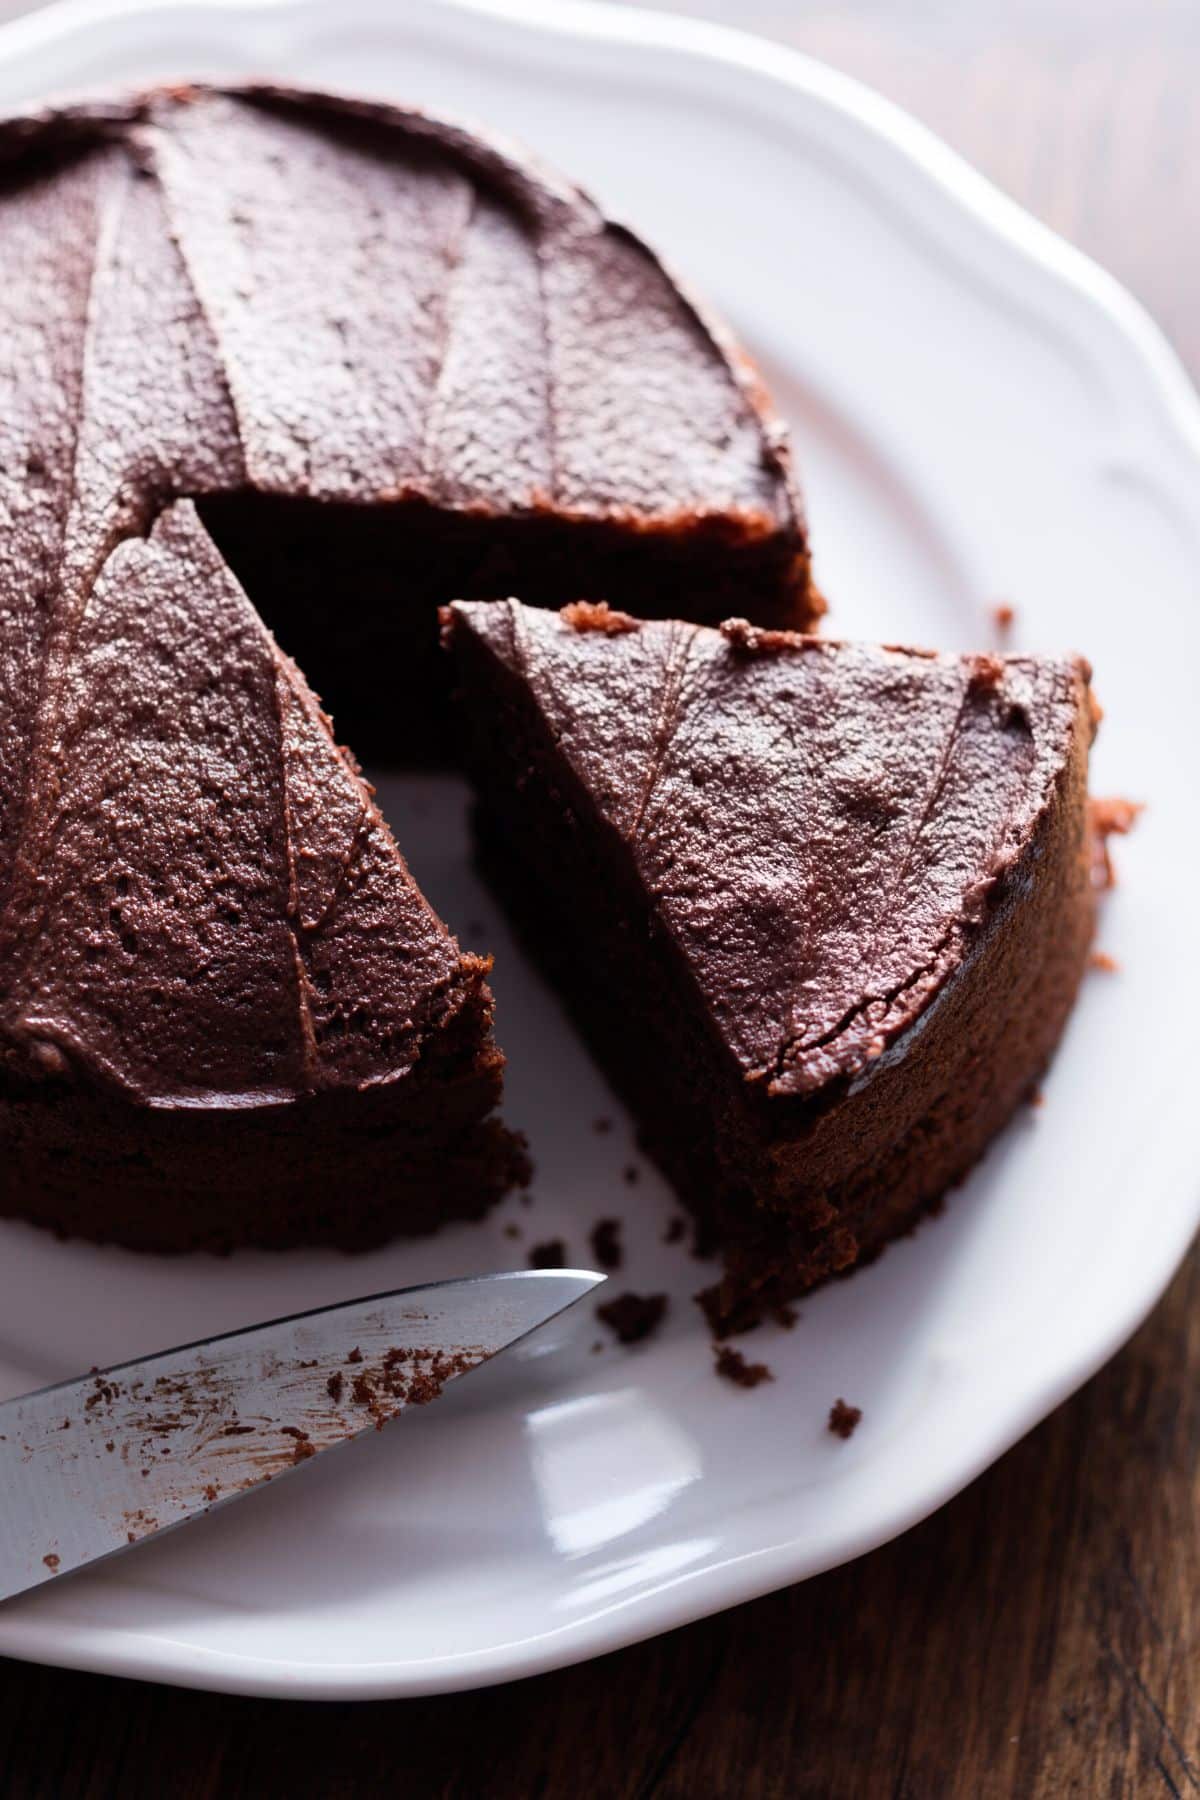 A round dairy-free chocolate cake on a white plate with a slice cut.